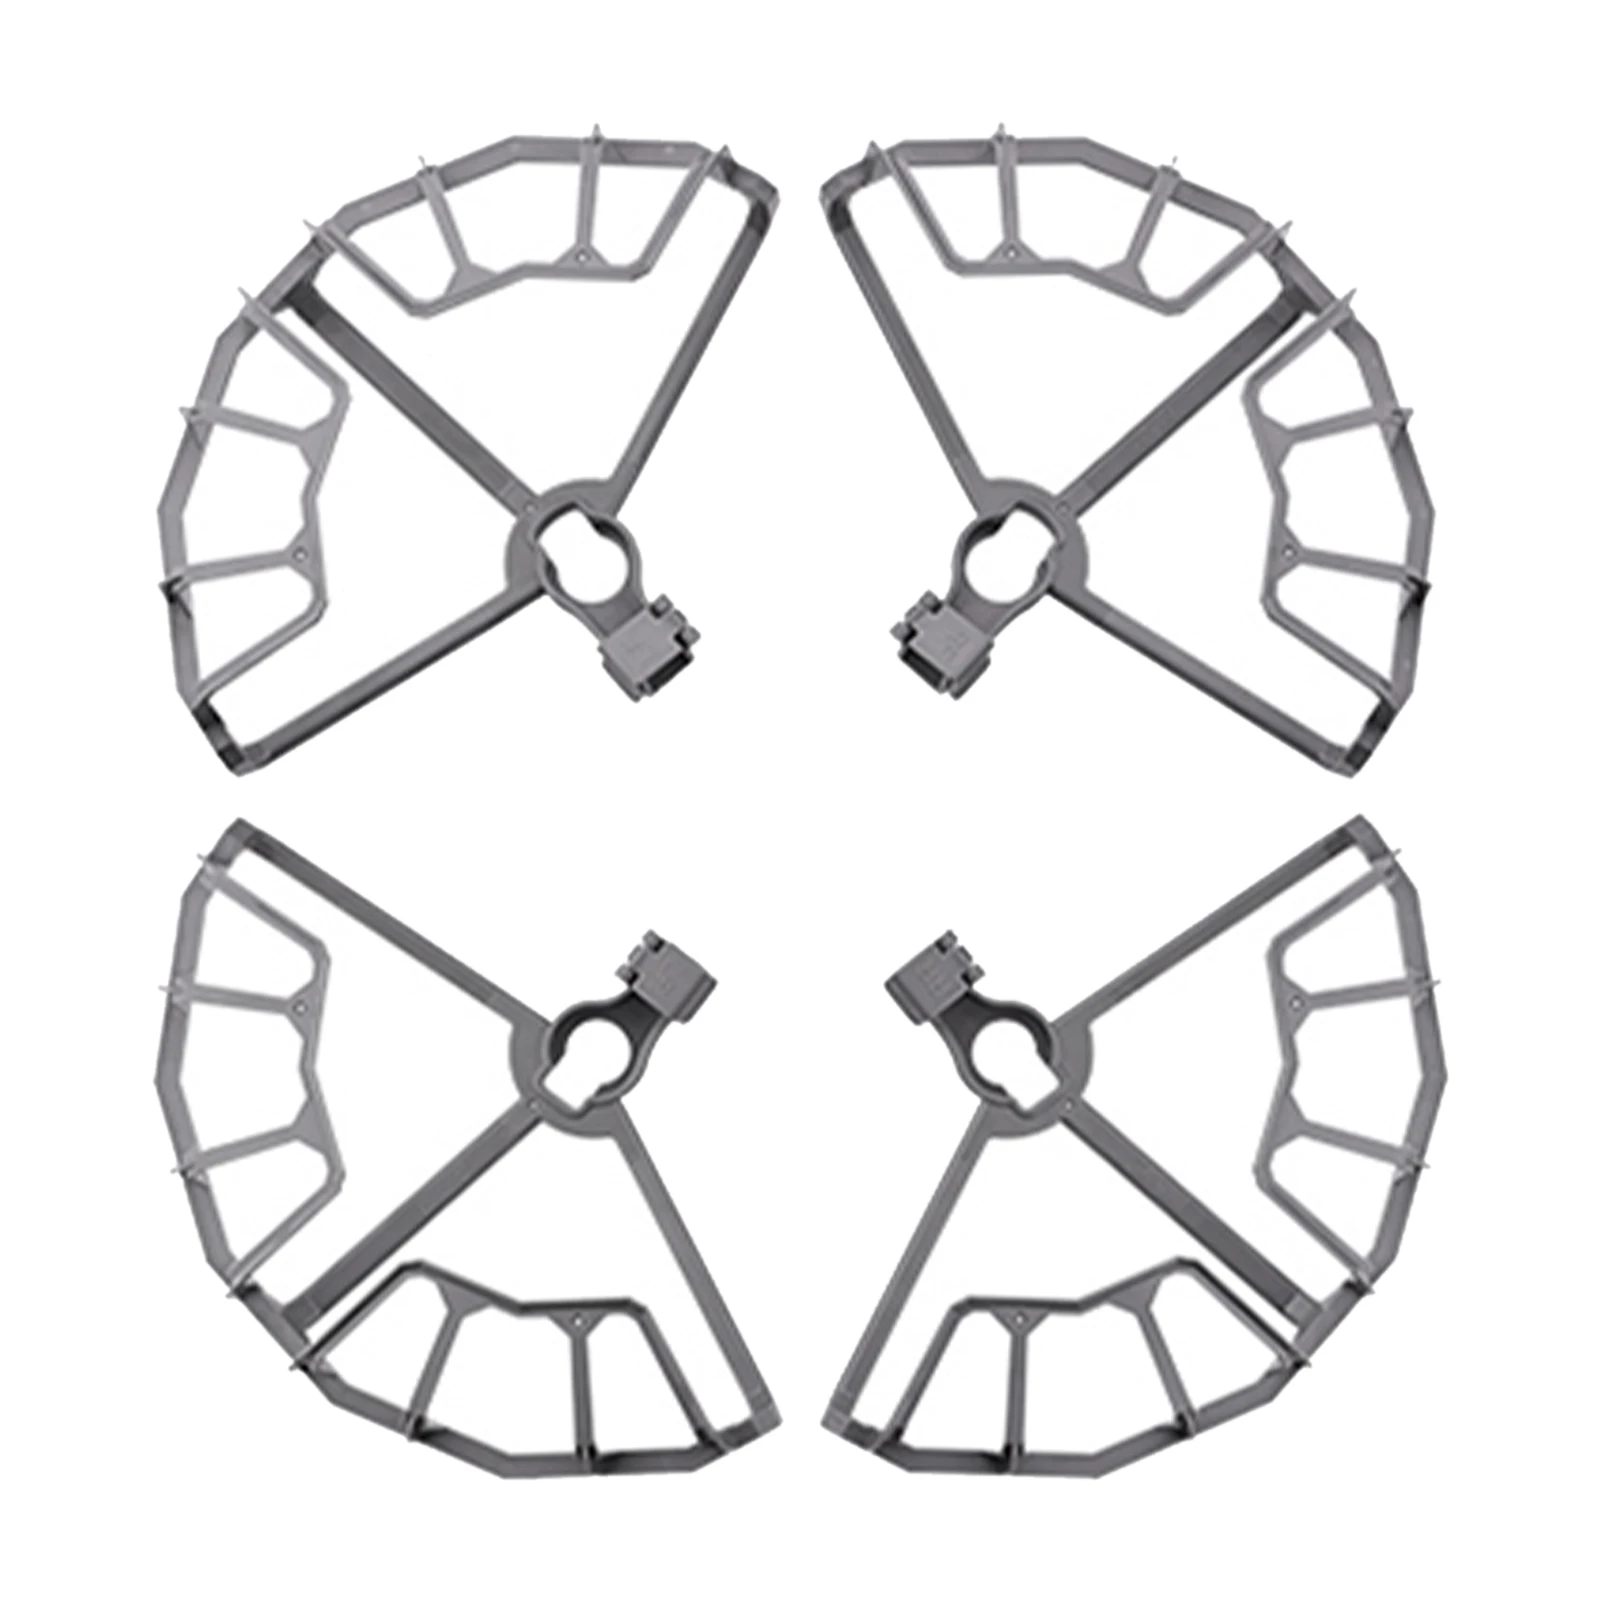 

Easy Install Anti Collision Quick Assembly Drone Accessories Propeller Guard Portable Scratch Proof Compatible With Mavic AIR 2S